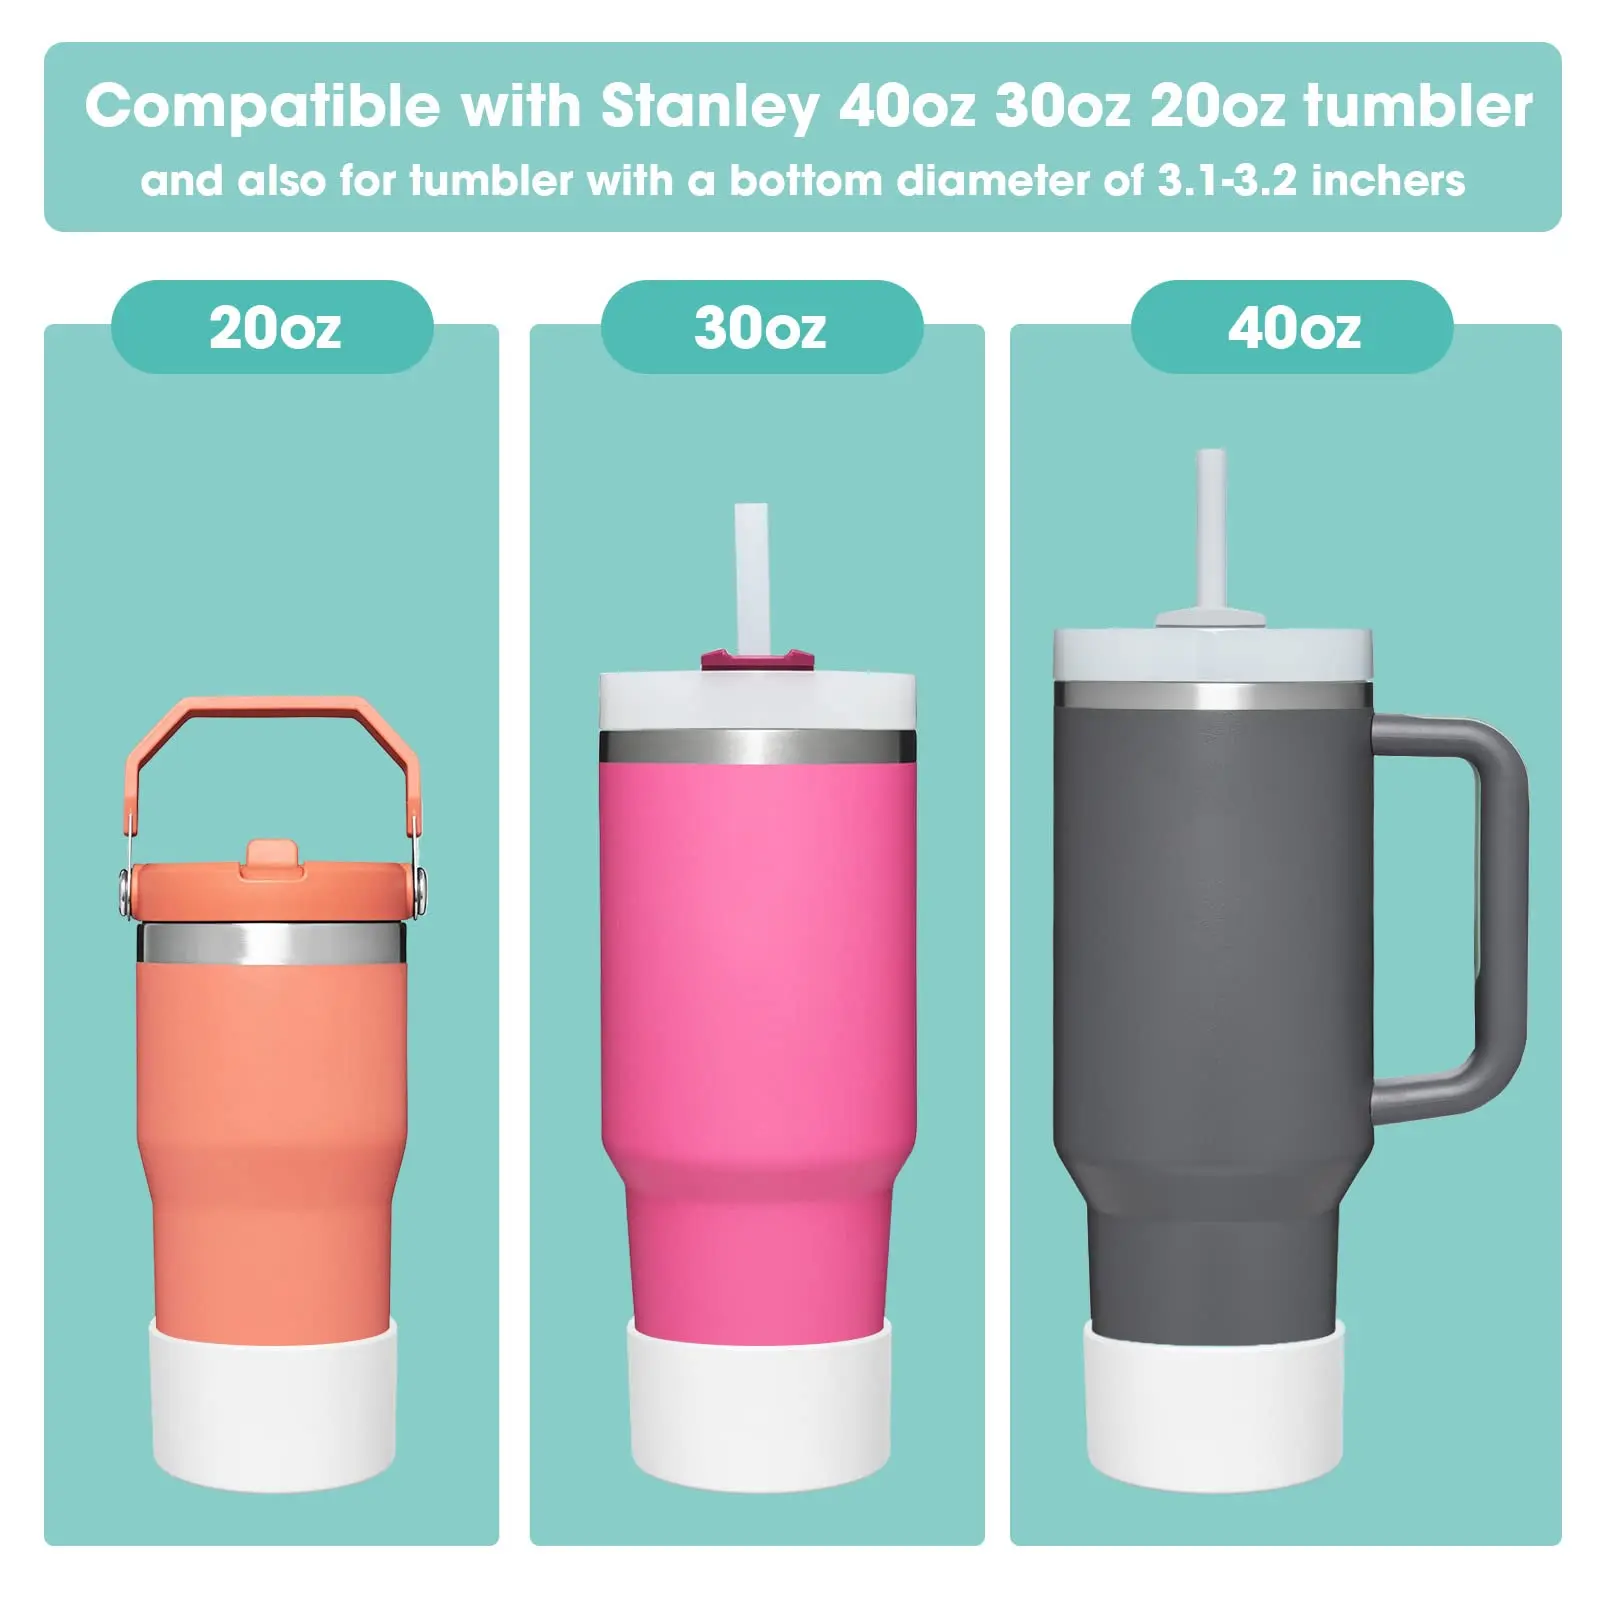 https://ae01.alicdn.com/kf/Sebe15f75b24e47e2977237f3274eaeafd/6Pack-Replacement-Straws-and-2Pack-Protective-Silicone-Boot-Sleeve-for-Stanley-40oz-30oz-20oz-14oz-Tumbler.jpg